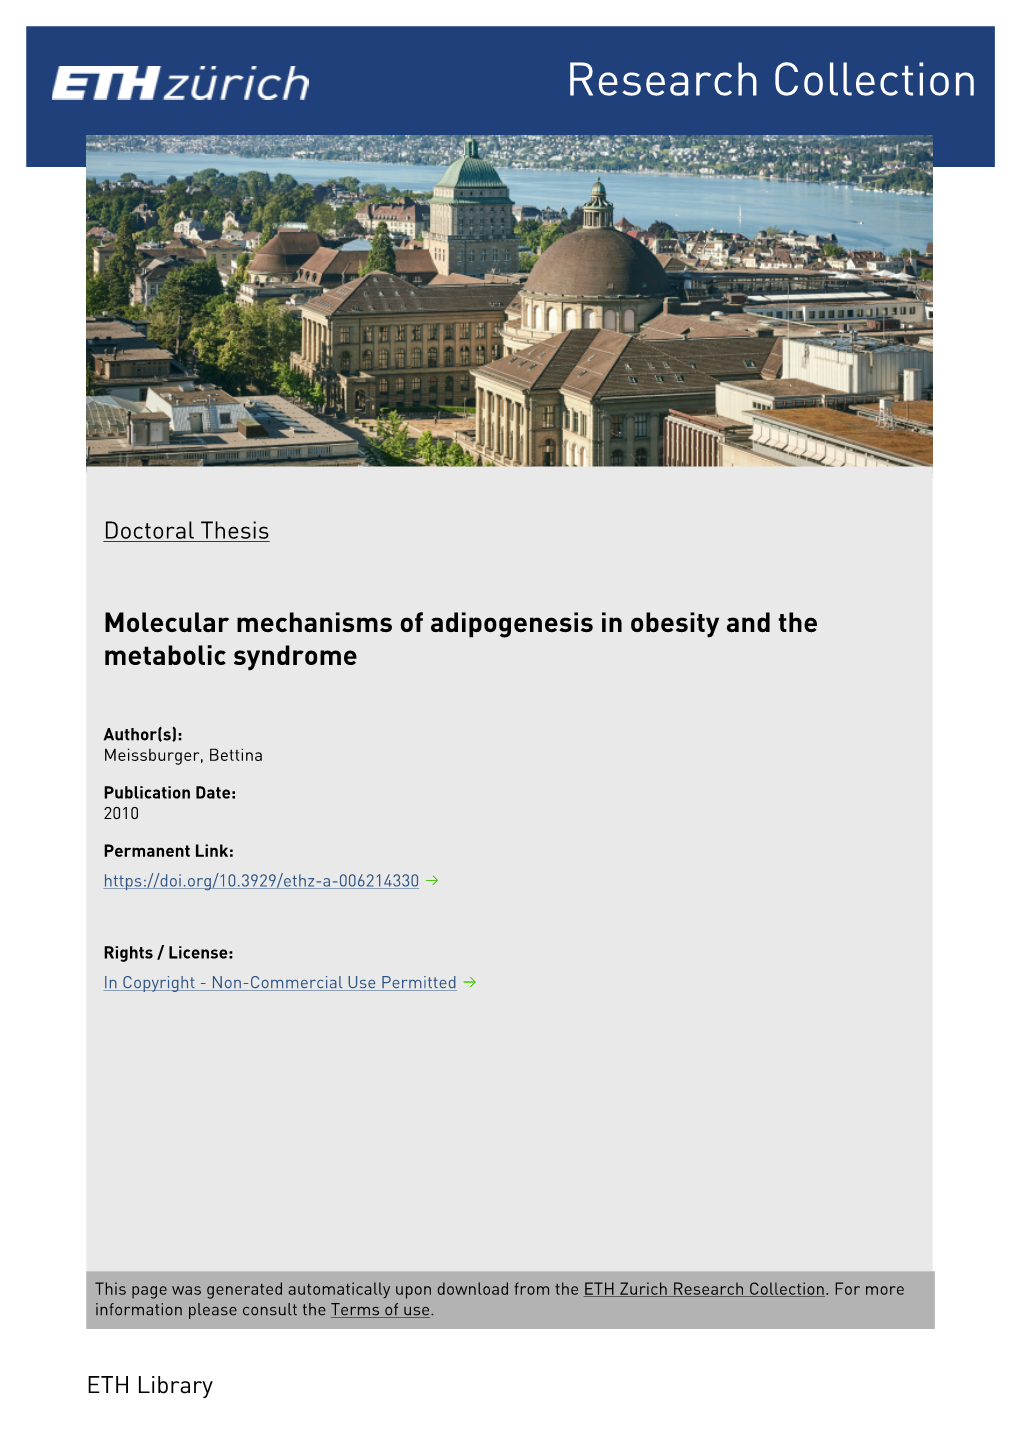 Molecular Mechanisms of Adipogenesis in Obesity and the Metabolic Syndrome